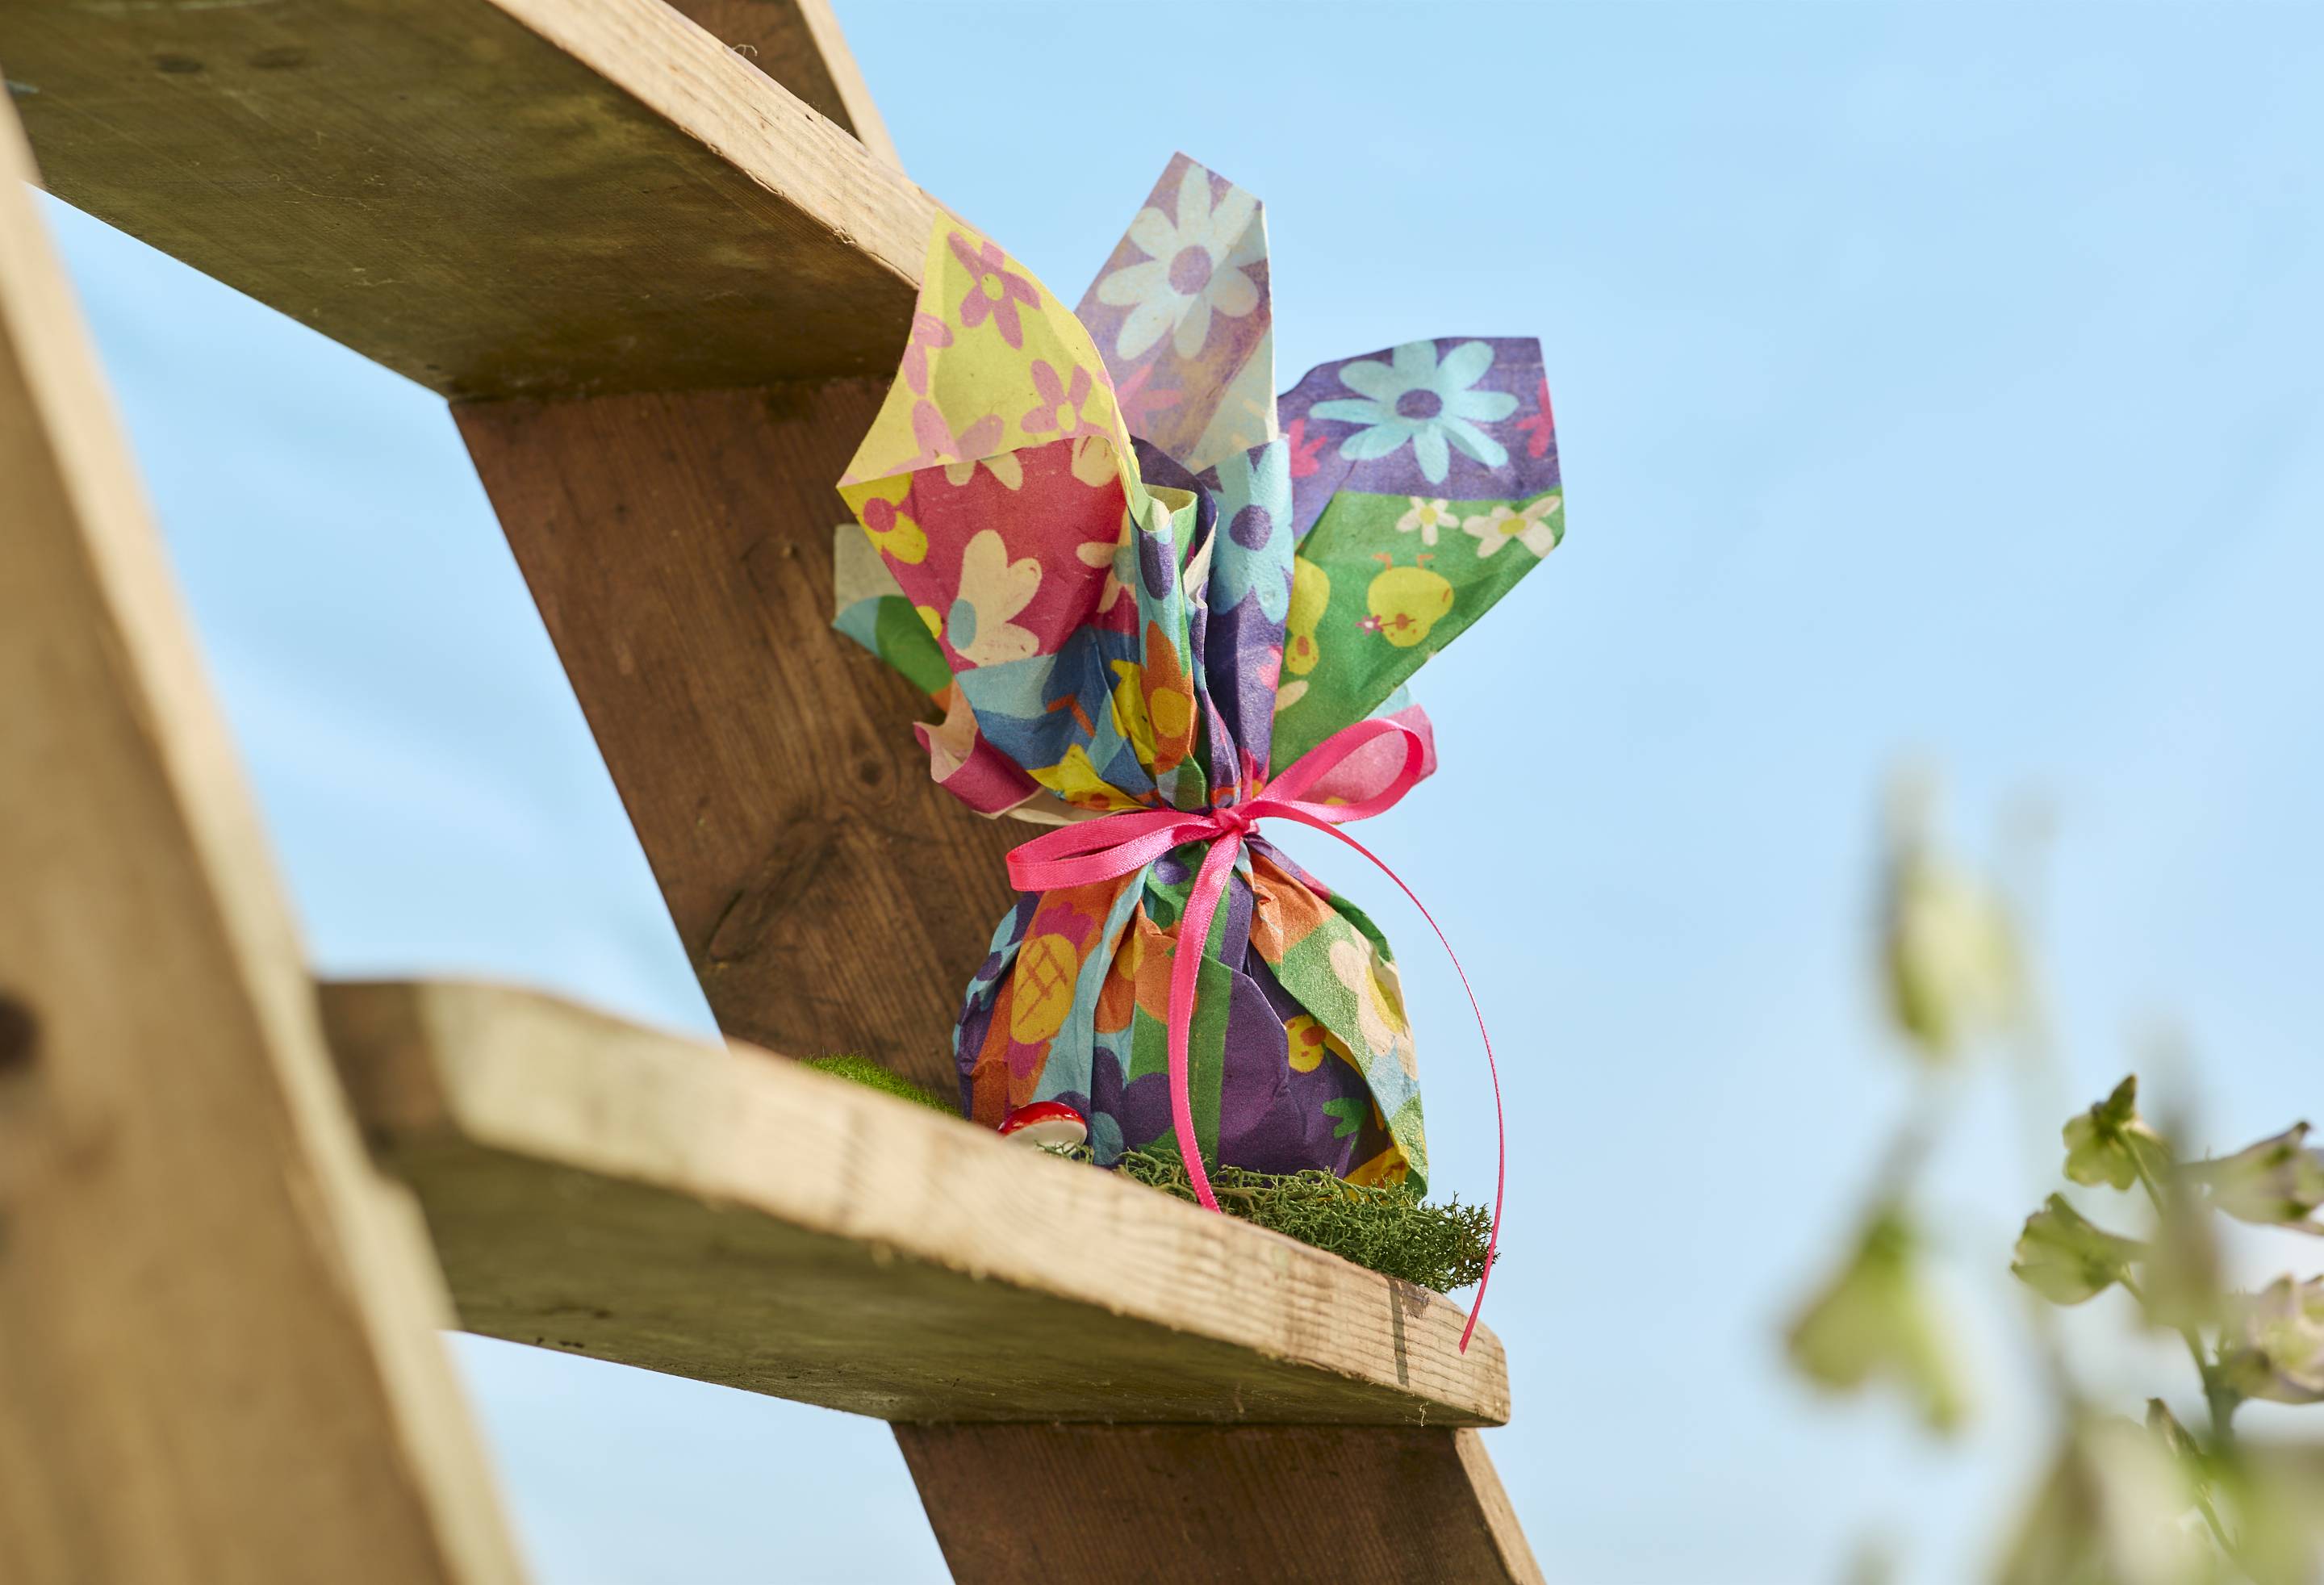 The image shows a close-up of a wooden ladder step. A bath bomb has been neatly wrapped in the Fresh As A Daisy lokta wrap and tied with a bow sitting on a step. 